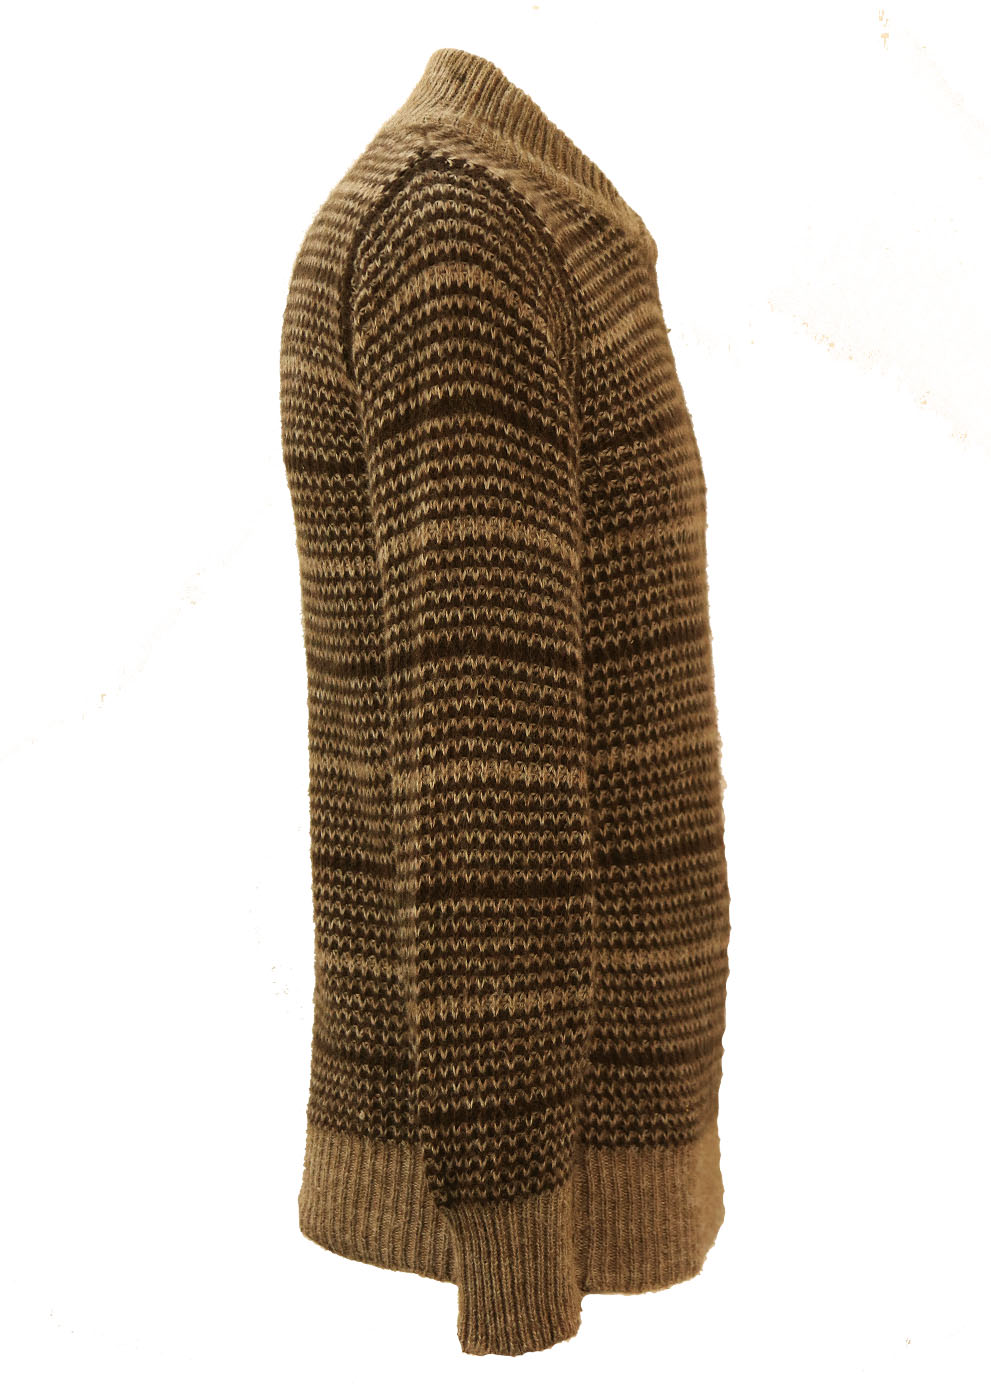 Brown & Beige Striped Knit Jumper with Crossover Collar Detail - S ...